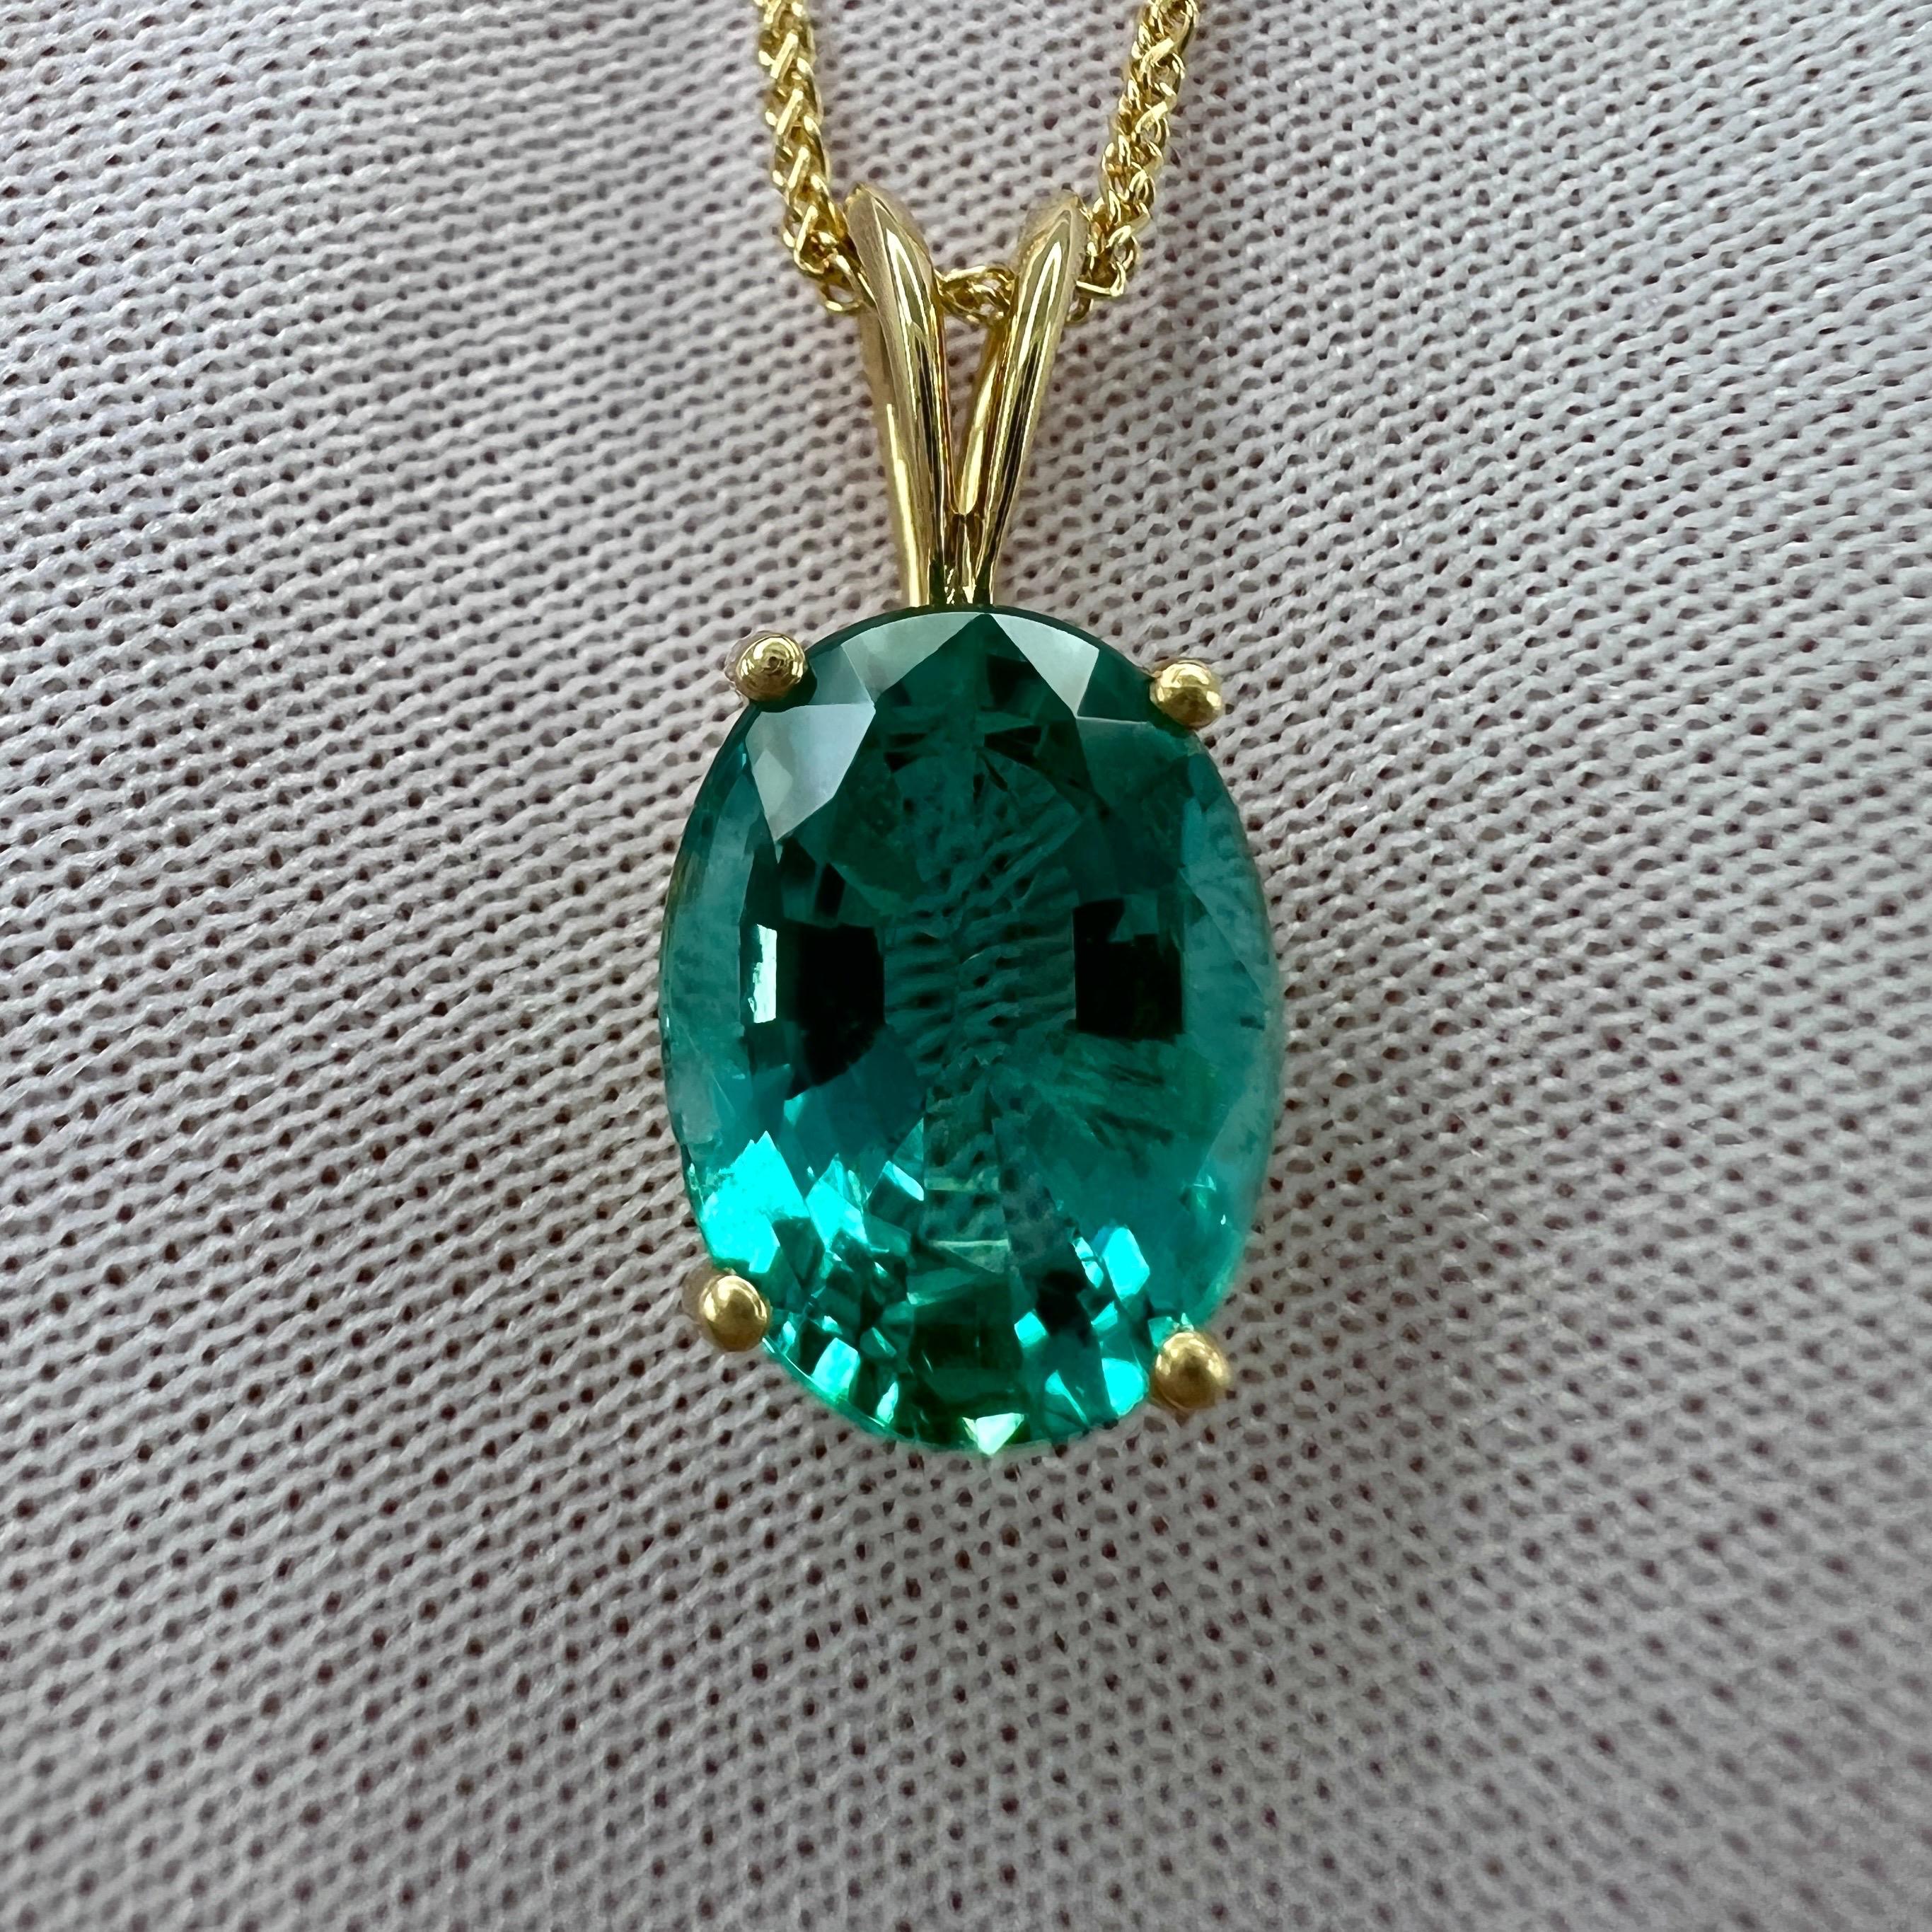 GIA Certified 2.95ct Vivid Blue Green Oval Cut Emerald 18k Gold Pendant Necklace For Sale 4